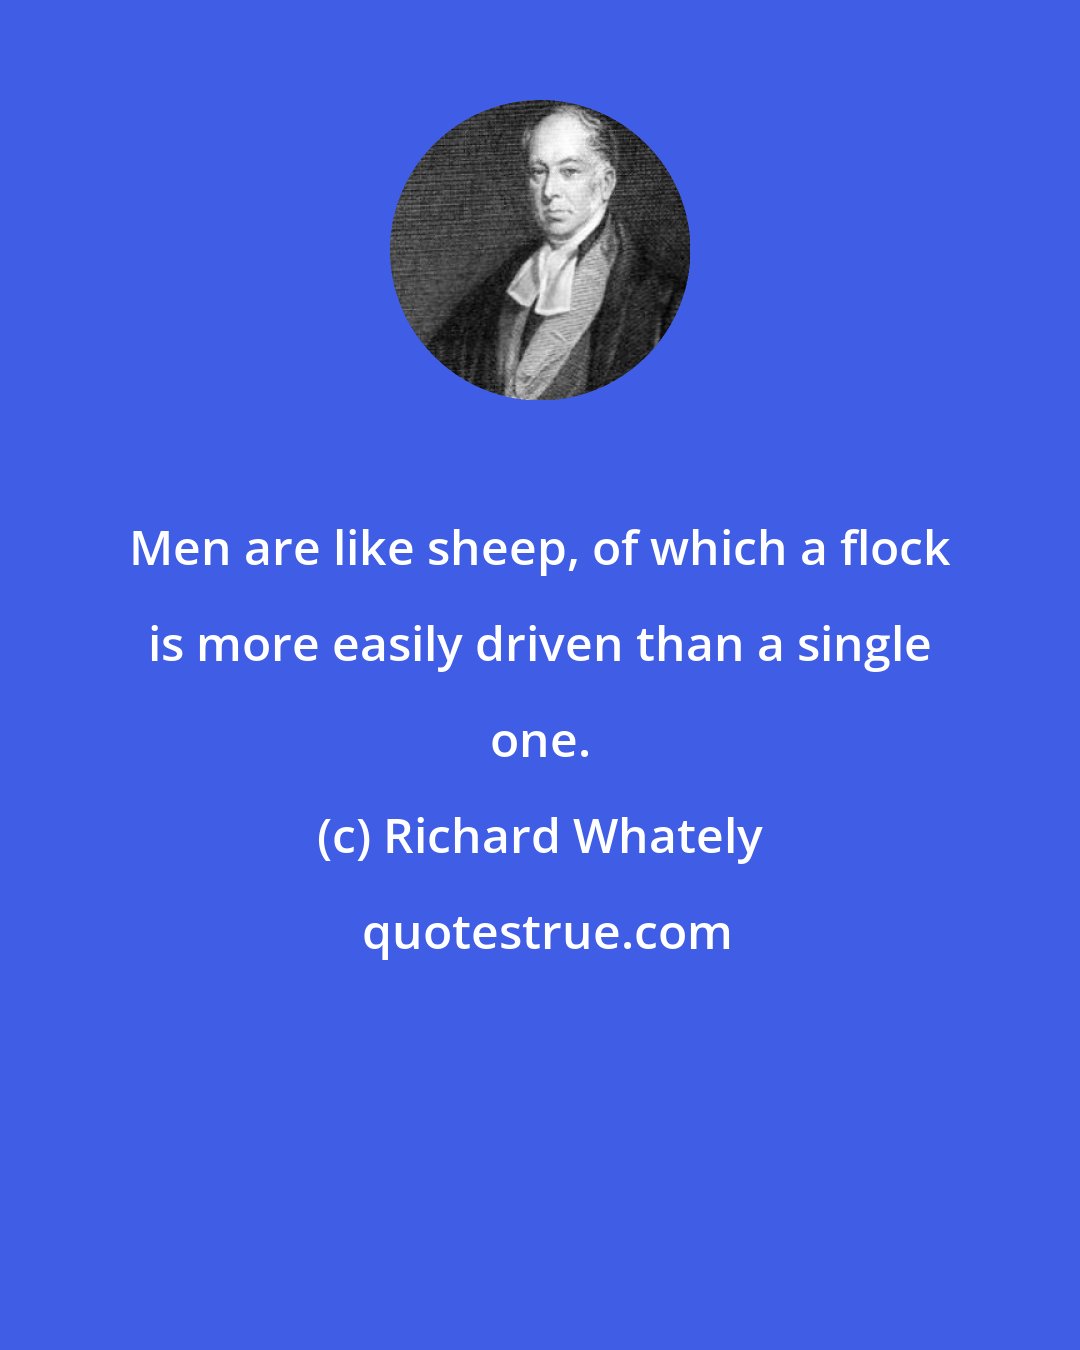 Richard Whately: Men are like sheep, of which a flock is more easily driven than a single one.